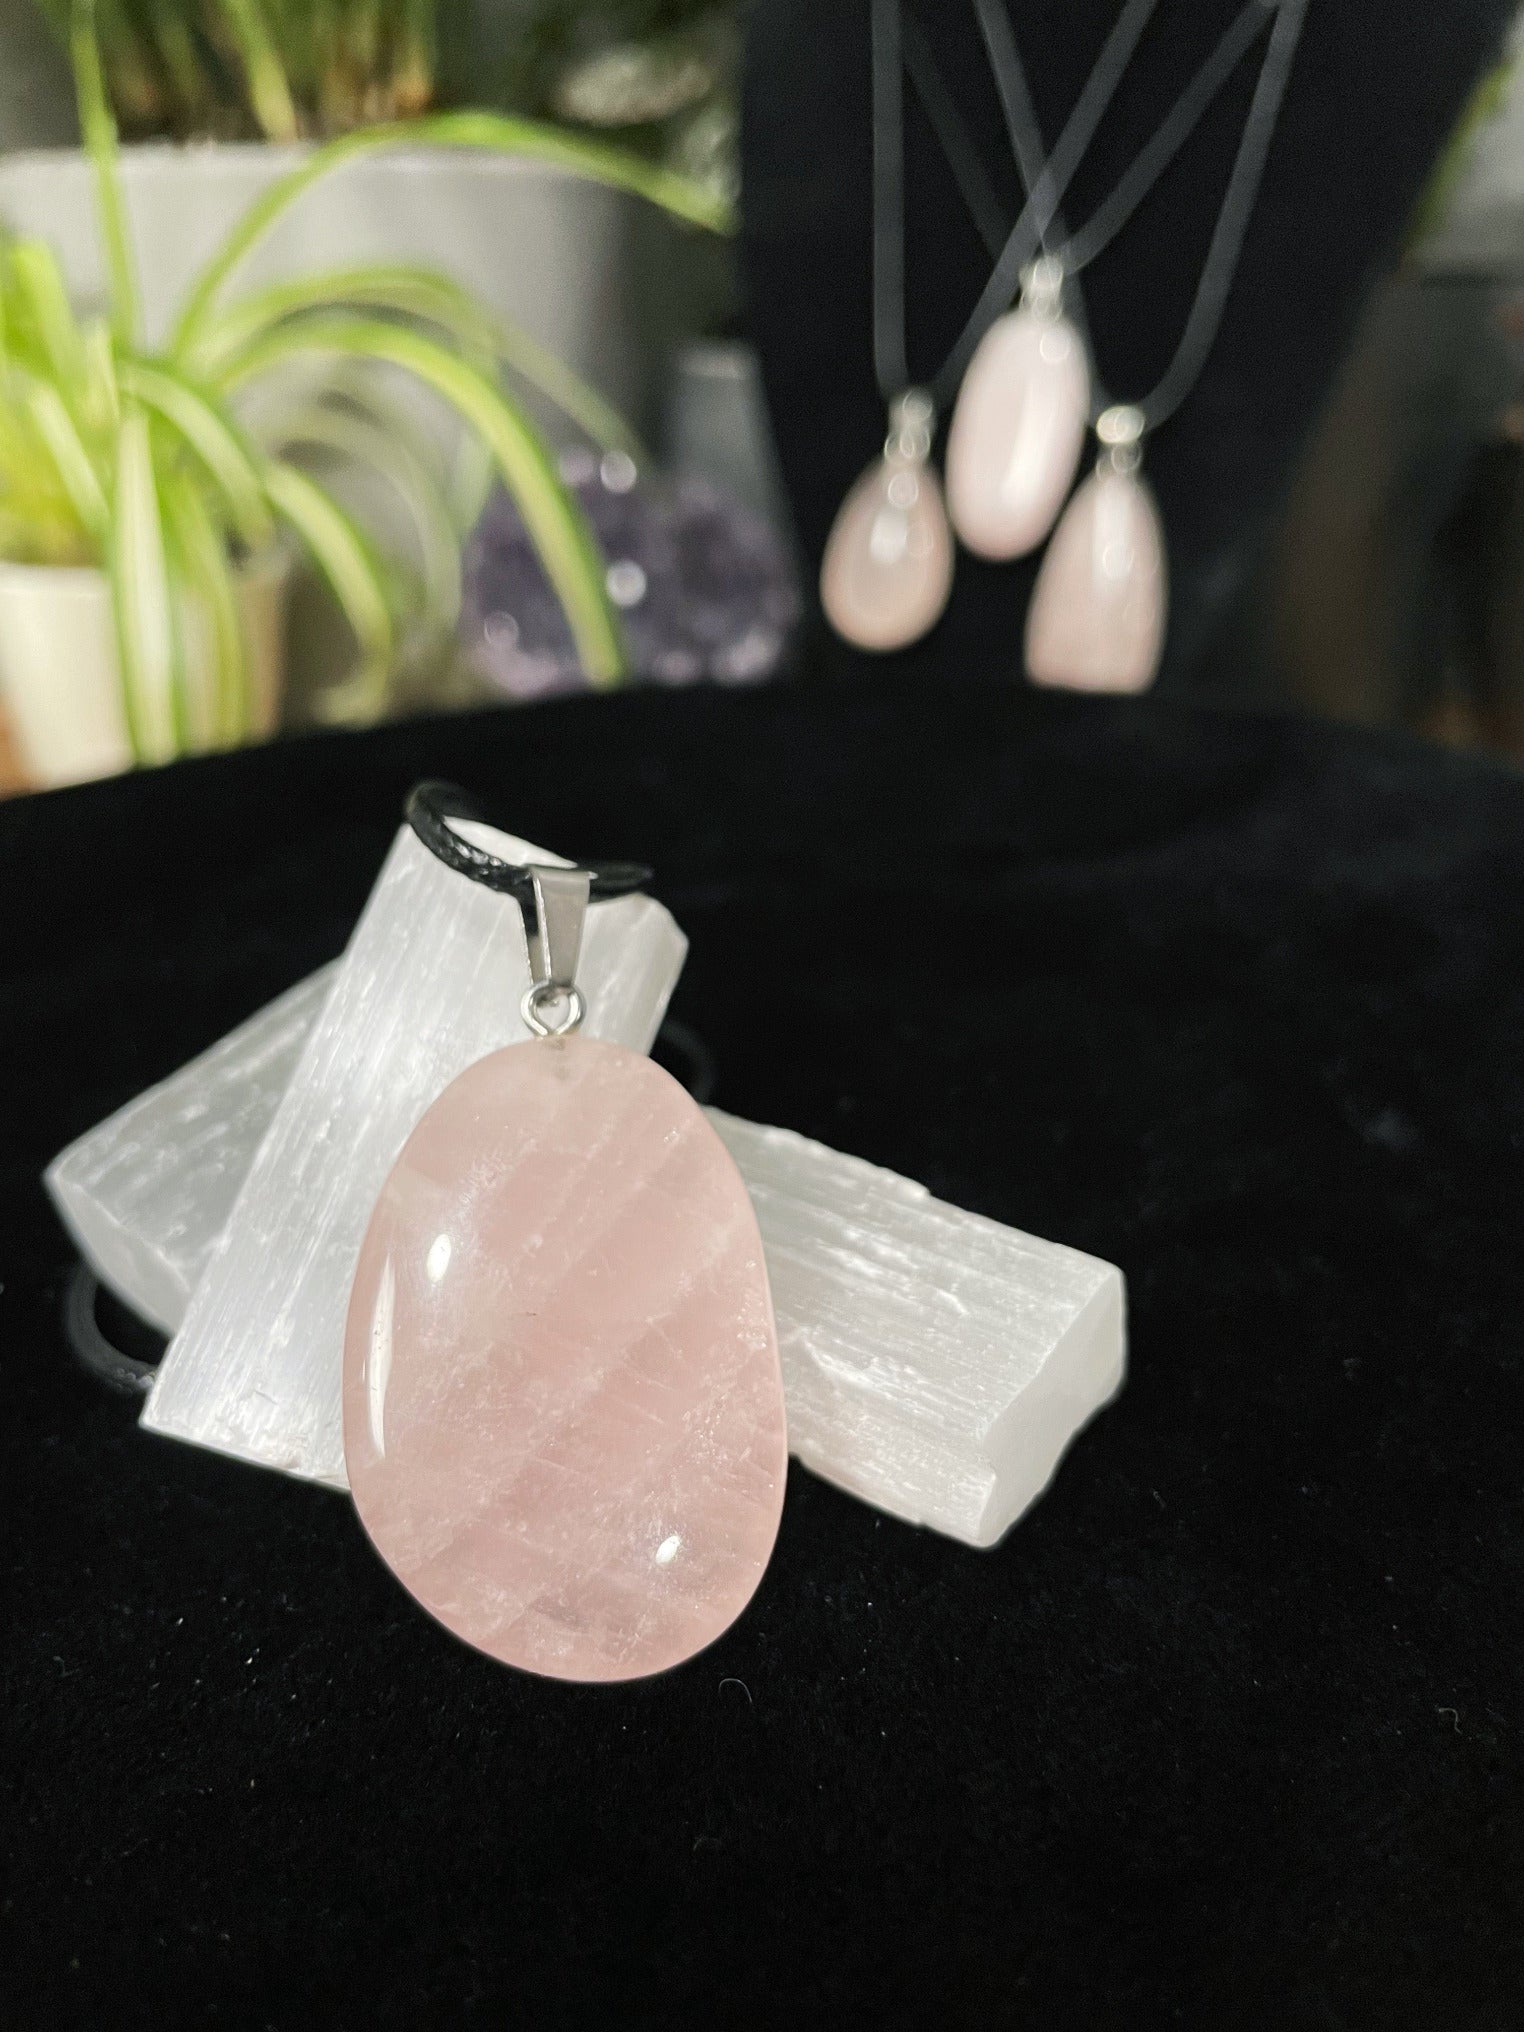 An image of a pink rose quartz random shaped pendant on a necklace. It sits atop some selenite chunks and a black velvet surface.